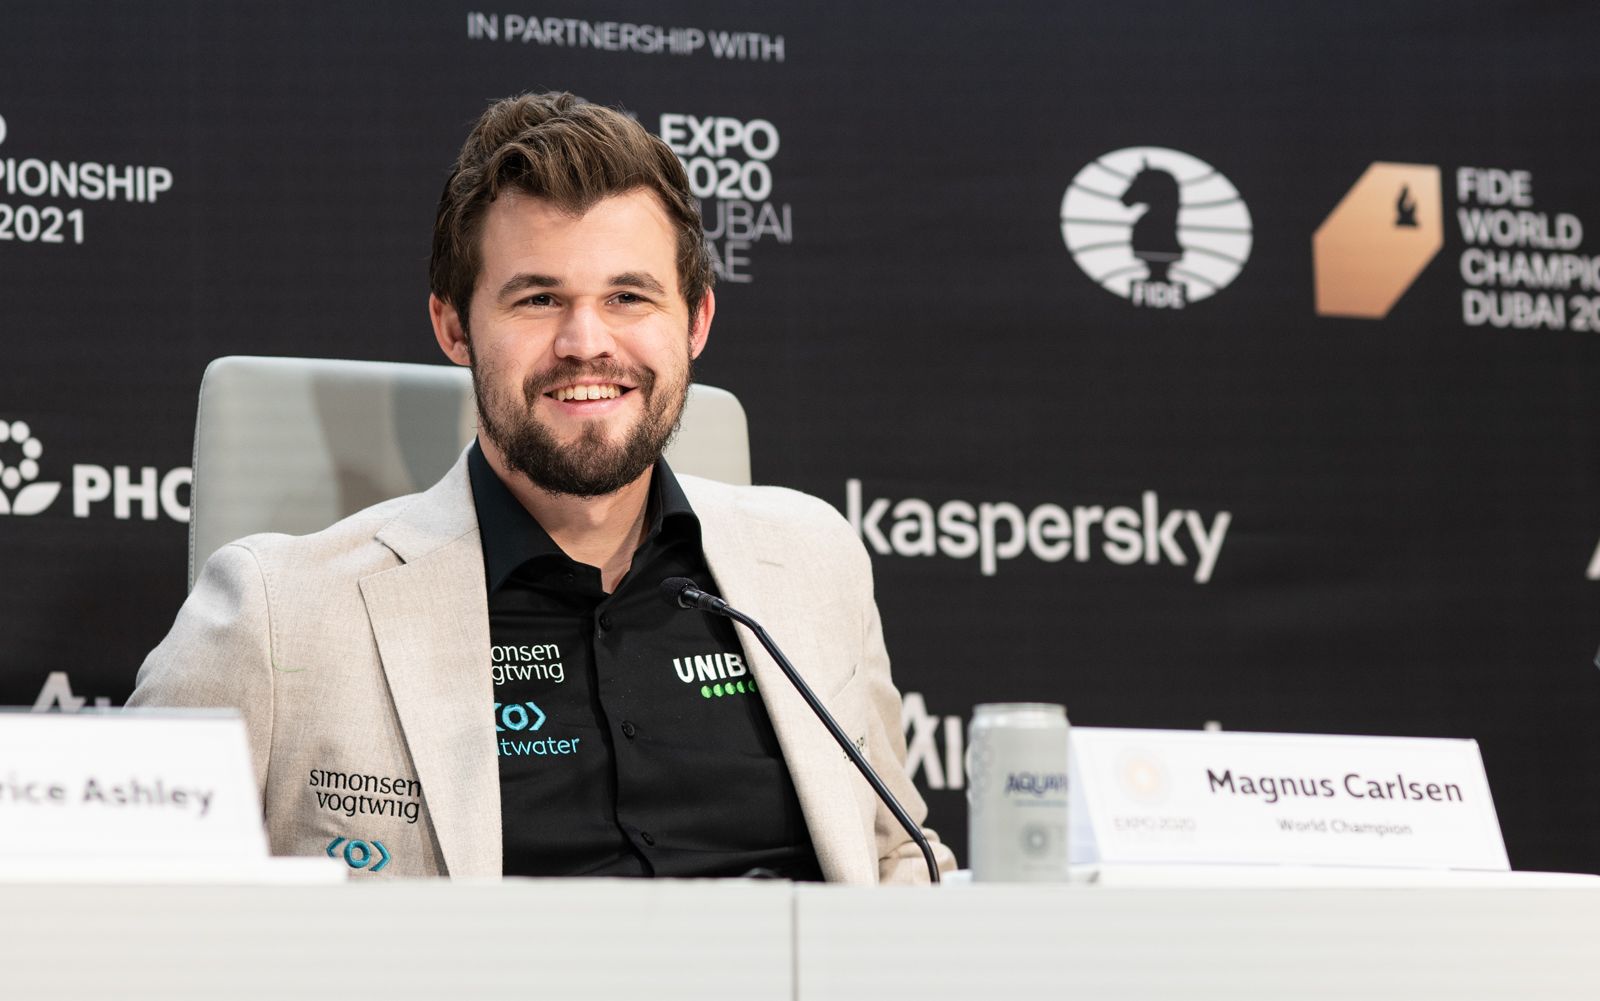 Investing Insights from the 2021 World Chess Championship